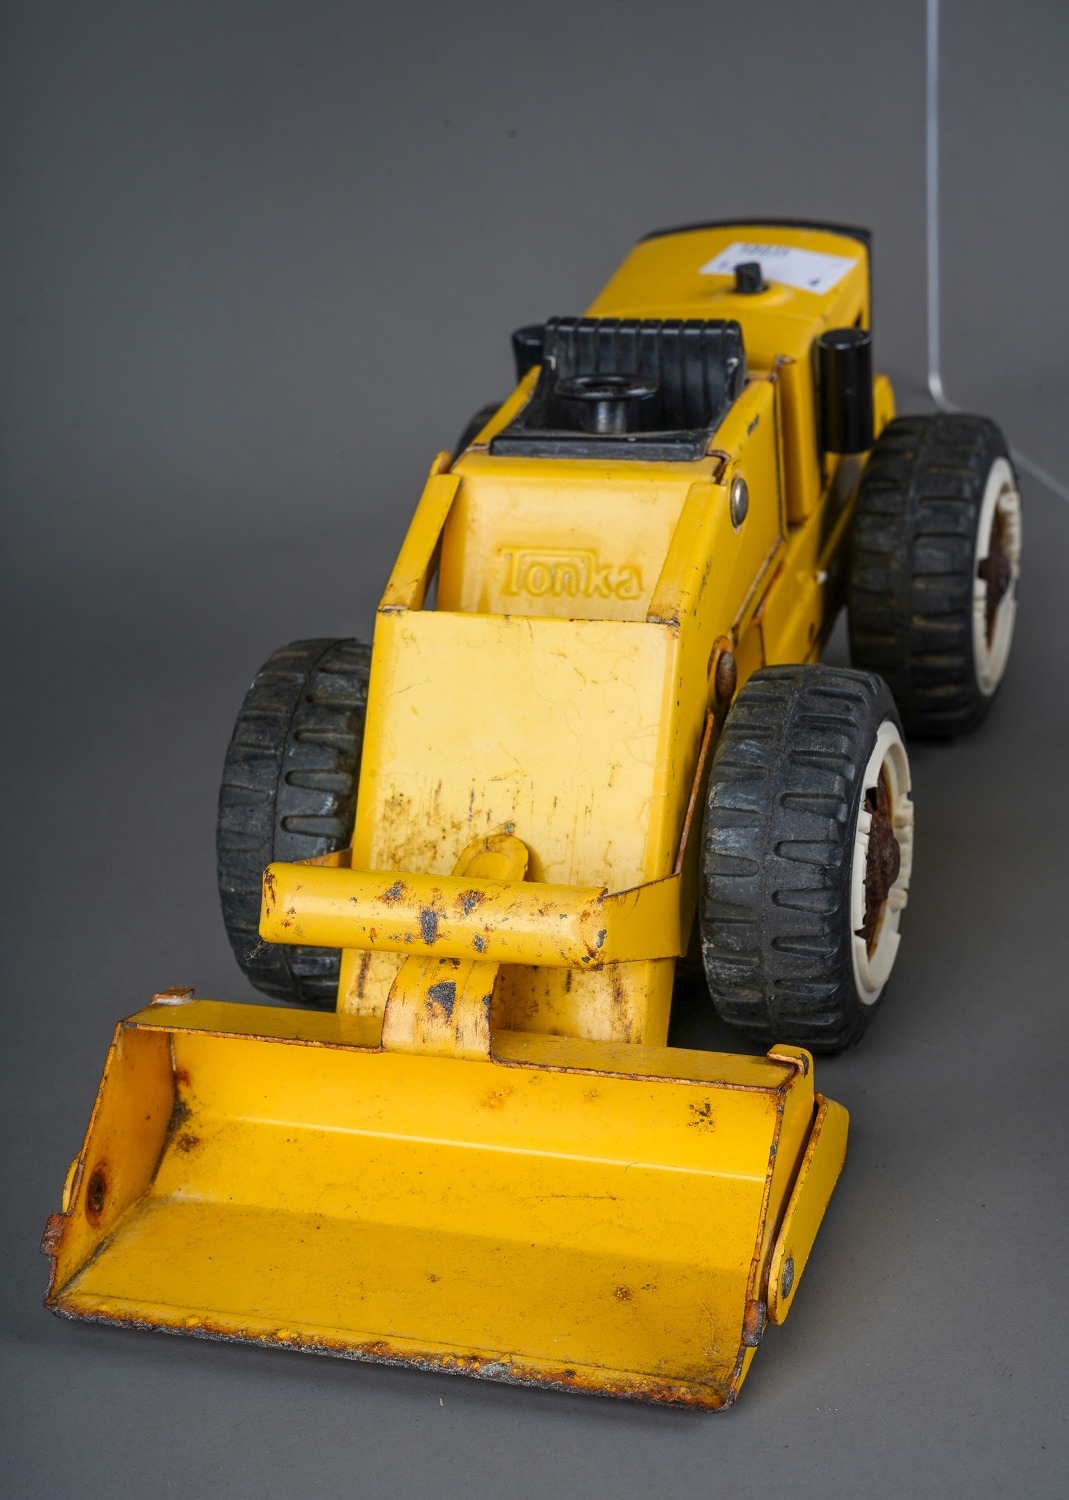 Tonka Toy. A group of medium sized construction vehicles in yellow, including scraper and forklift - Image 4 of 8